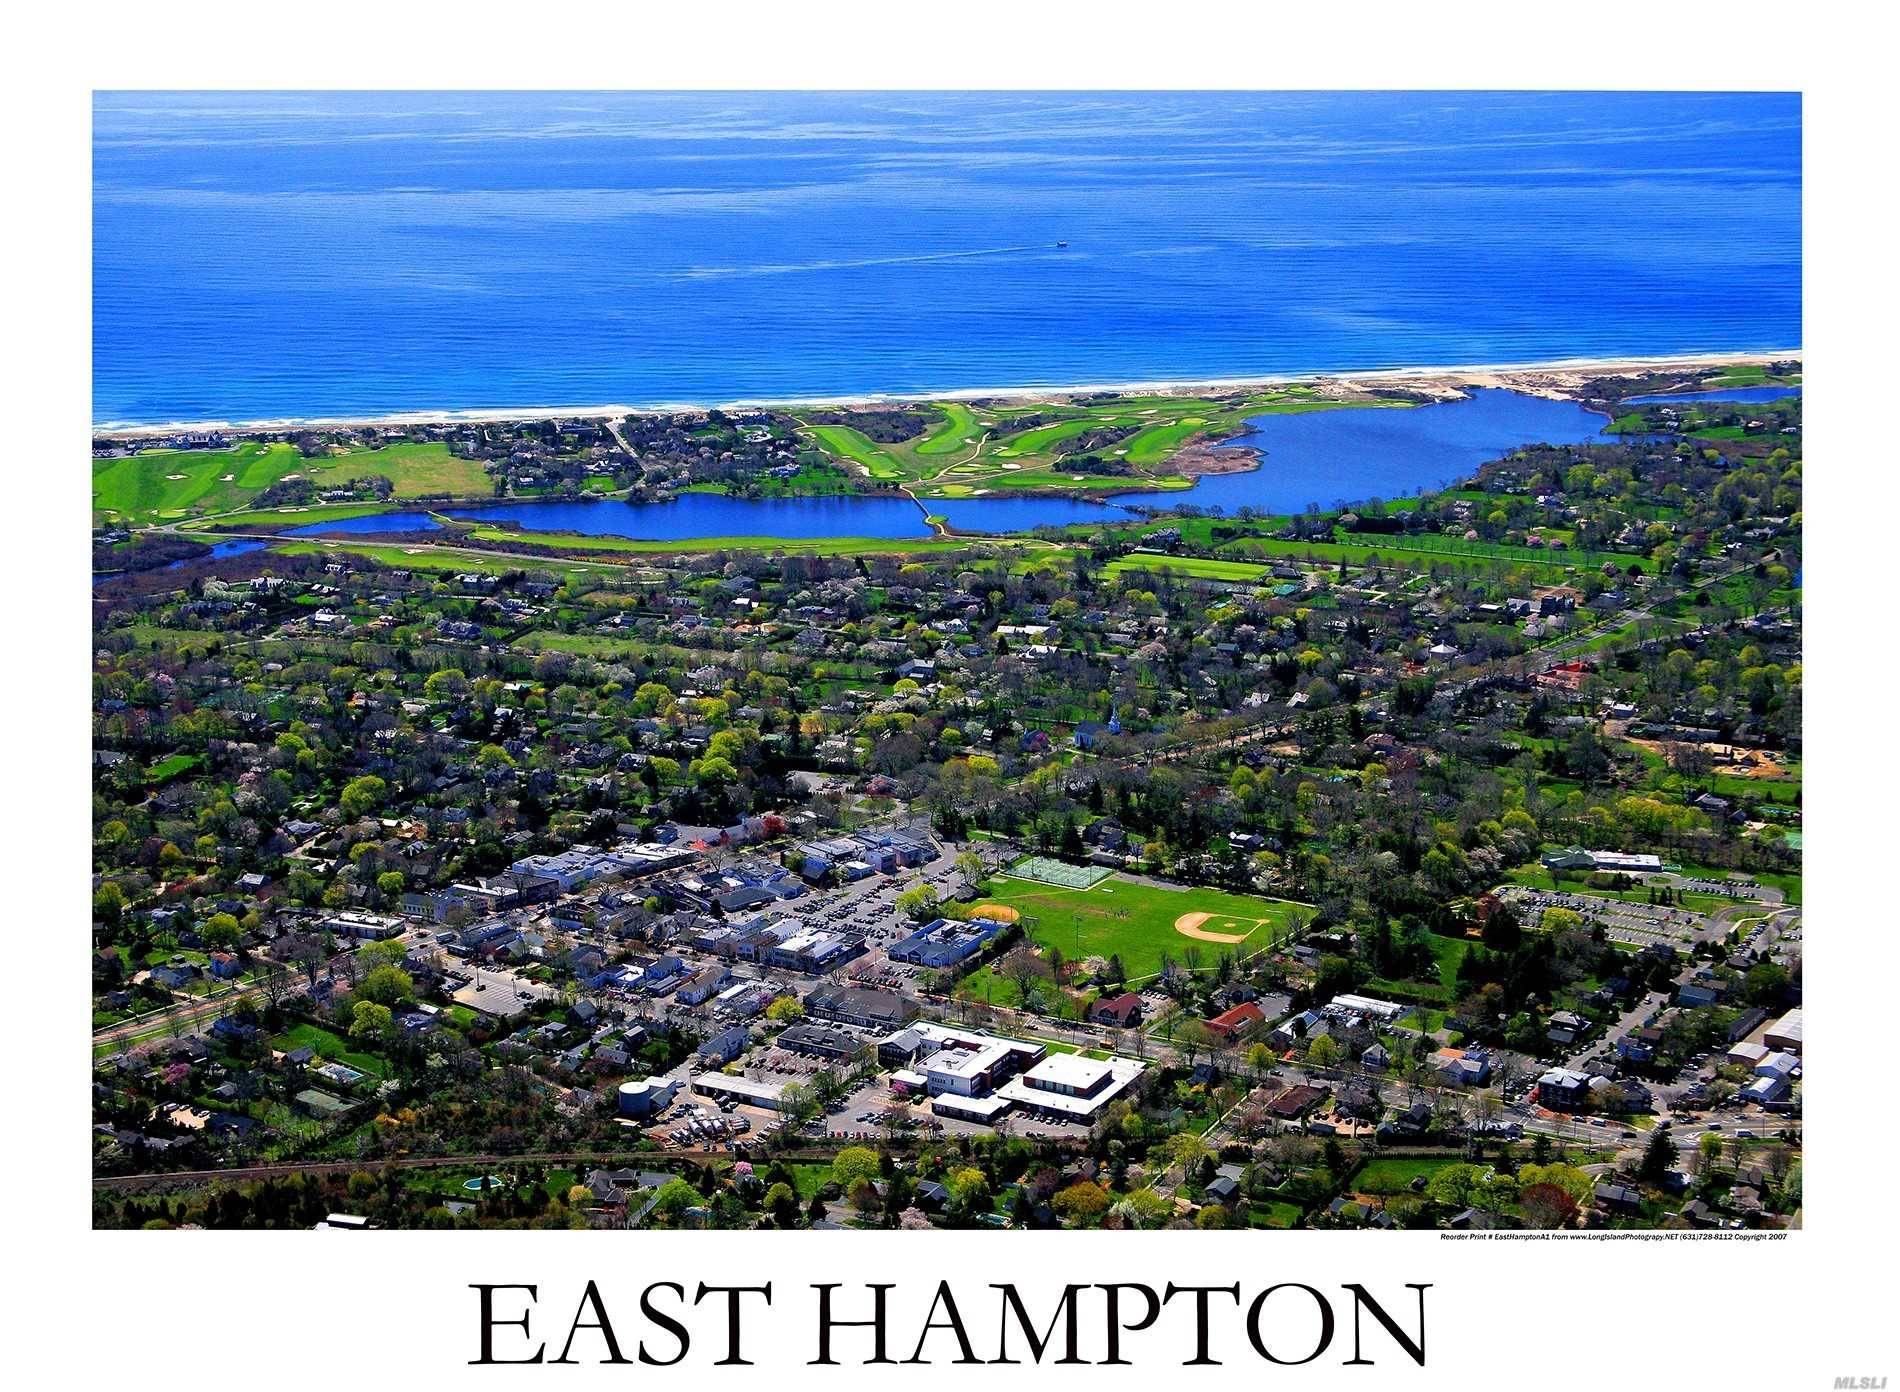 Protect Your Family !, Move Out Of New York City To Safe Magnificent East Hampton.